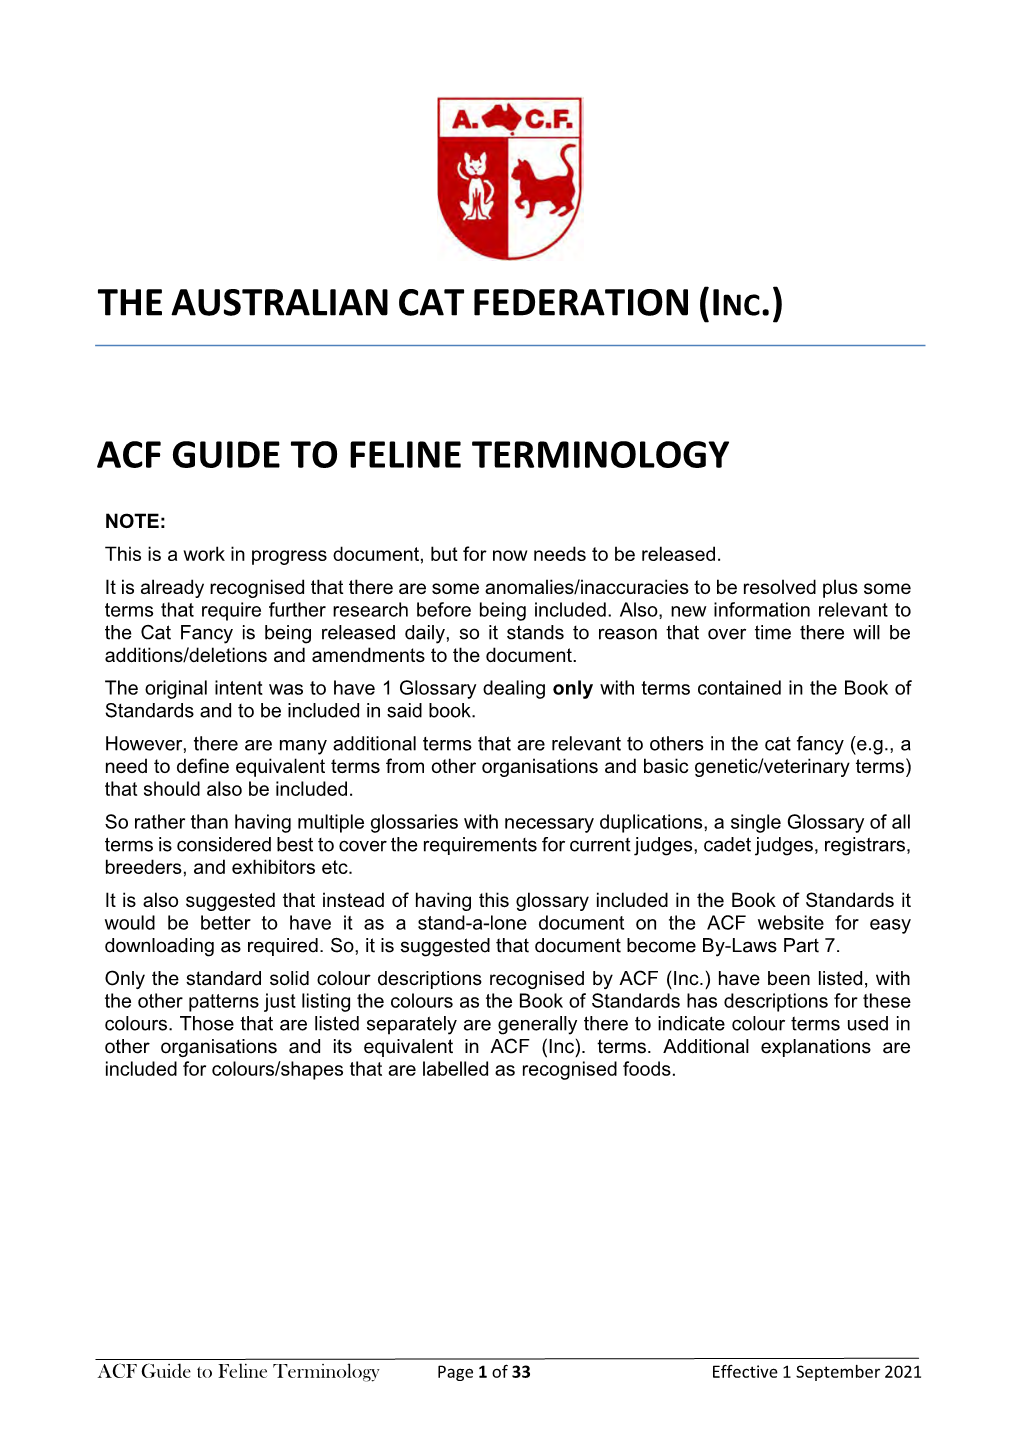 Acf Guide to Feline Terminology